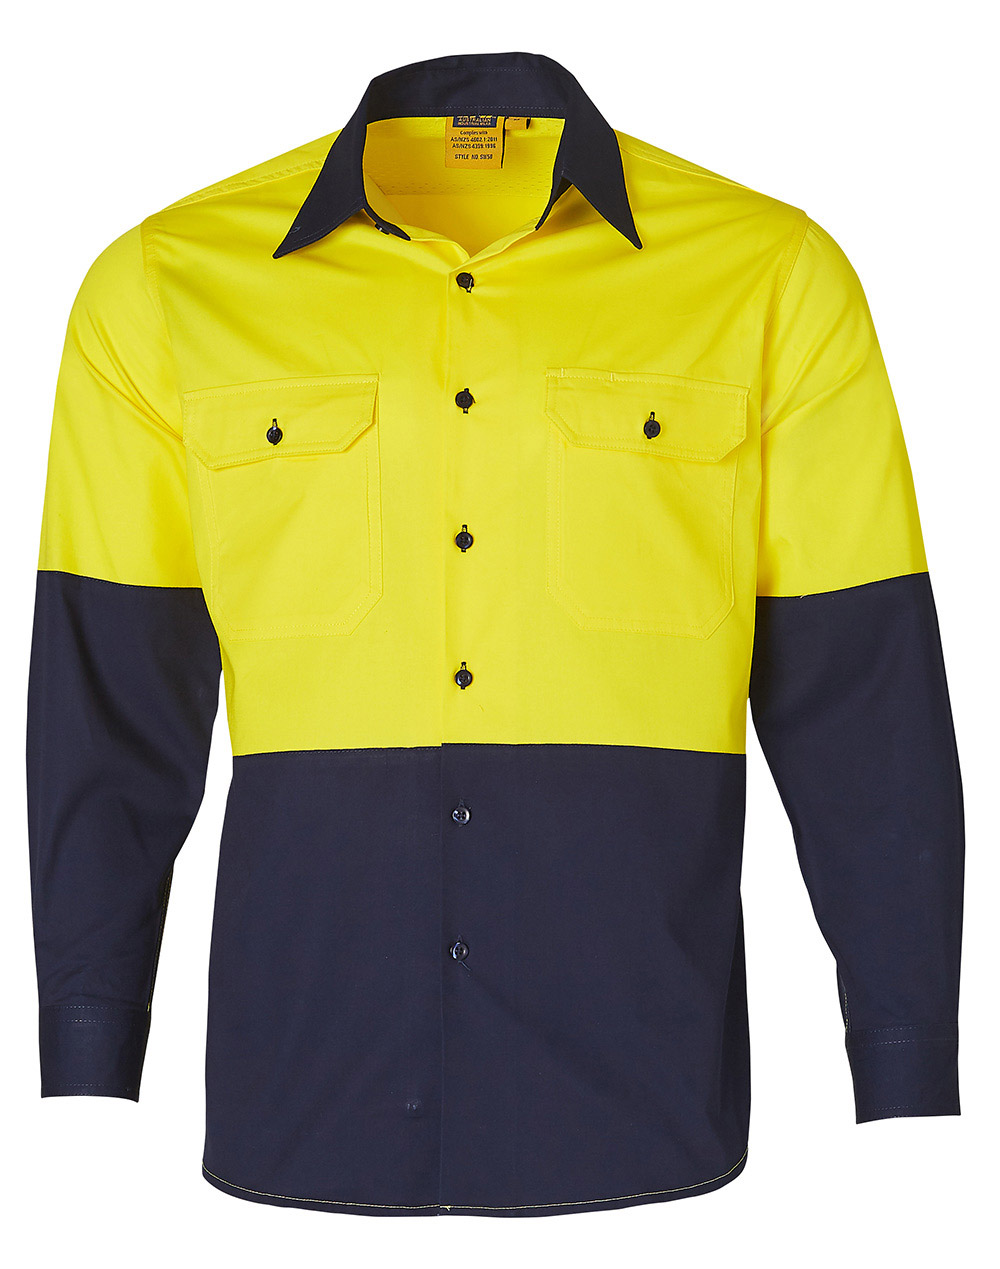 SW58/SW64 LONG SLEEVE SAFETY SHIRT